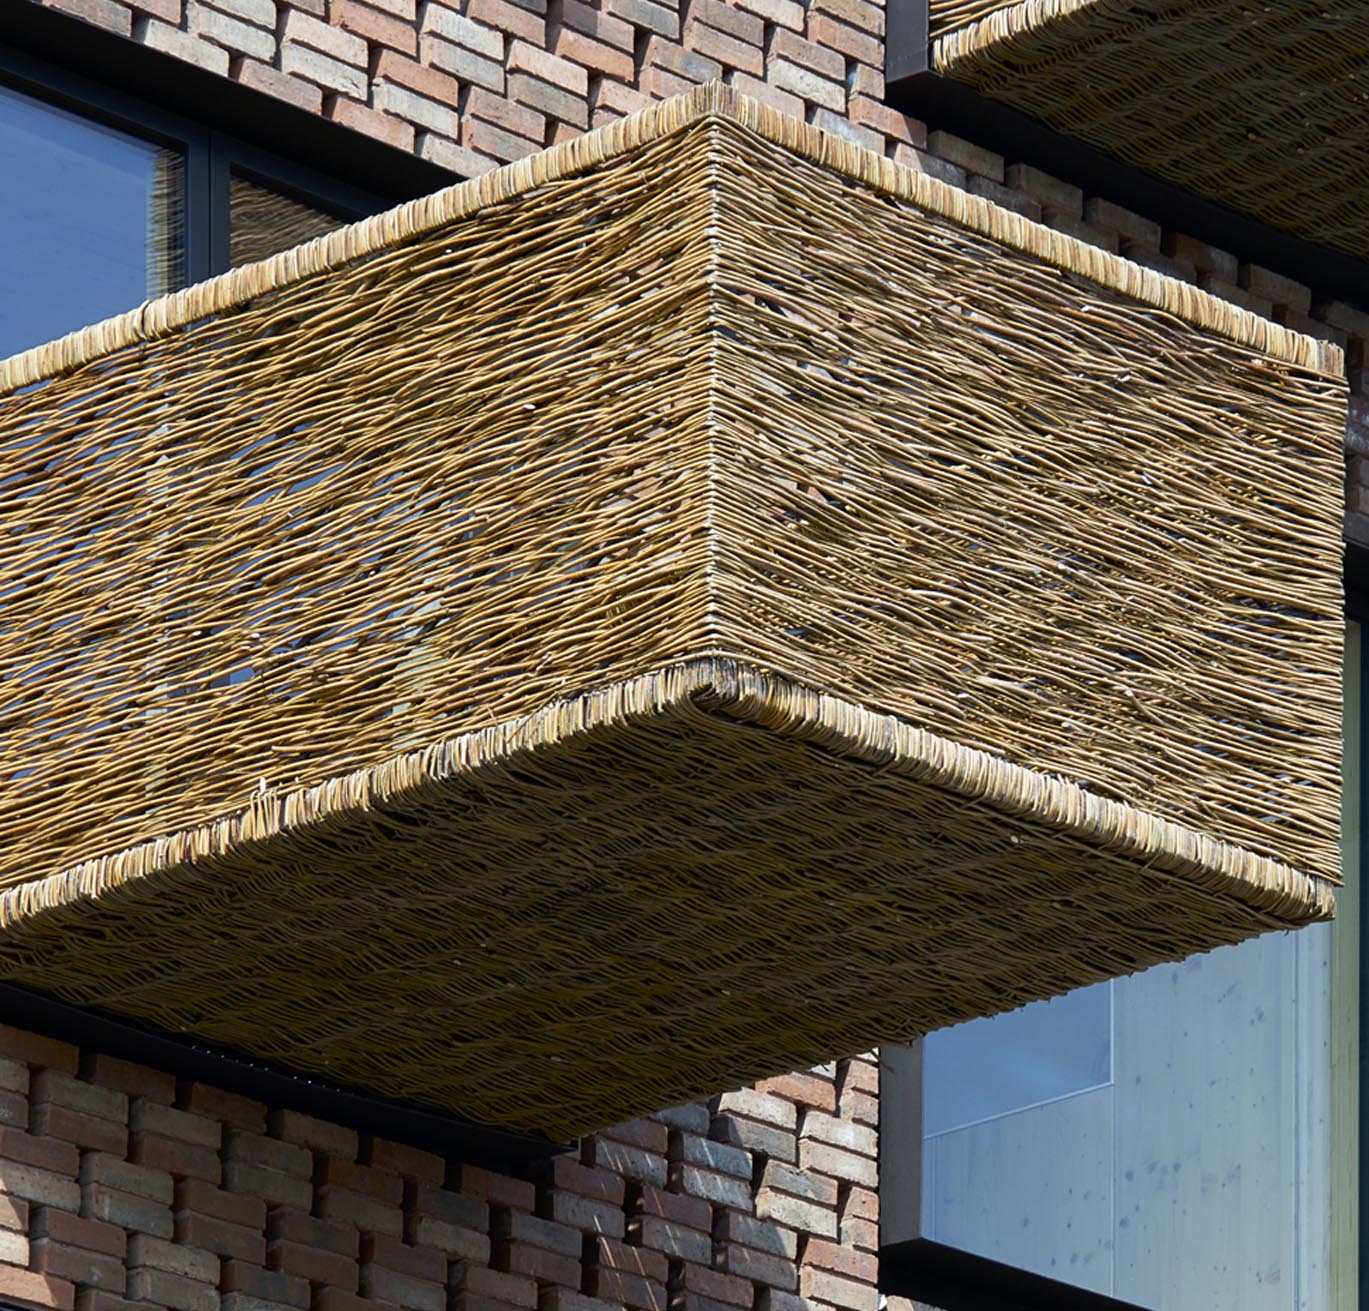 A protruding balcony made with a steel frame covered in woven wicker.